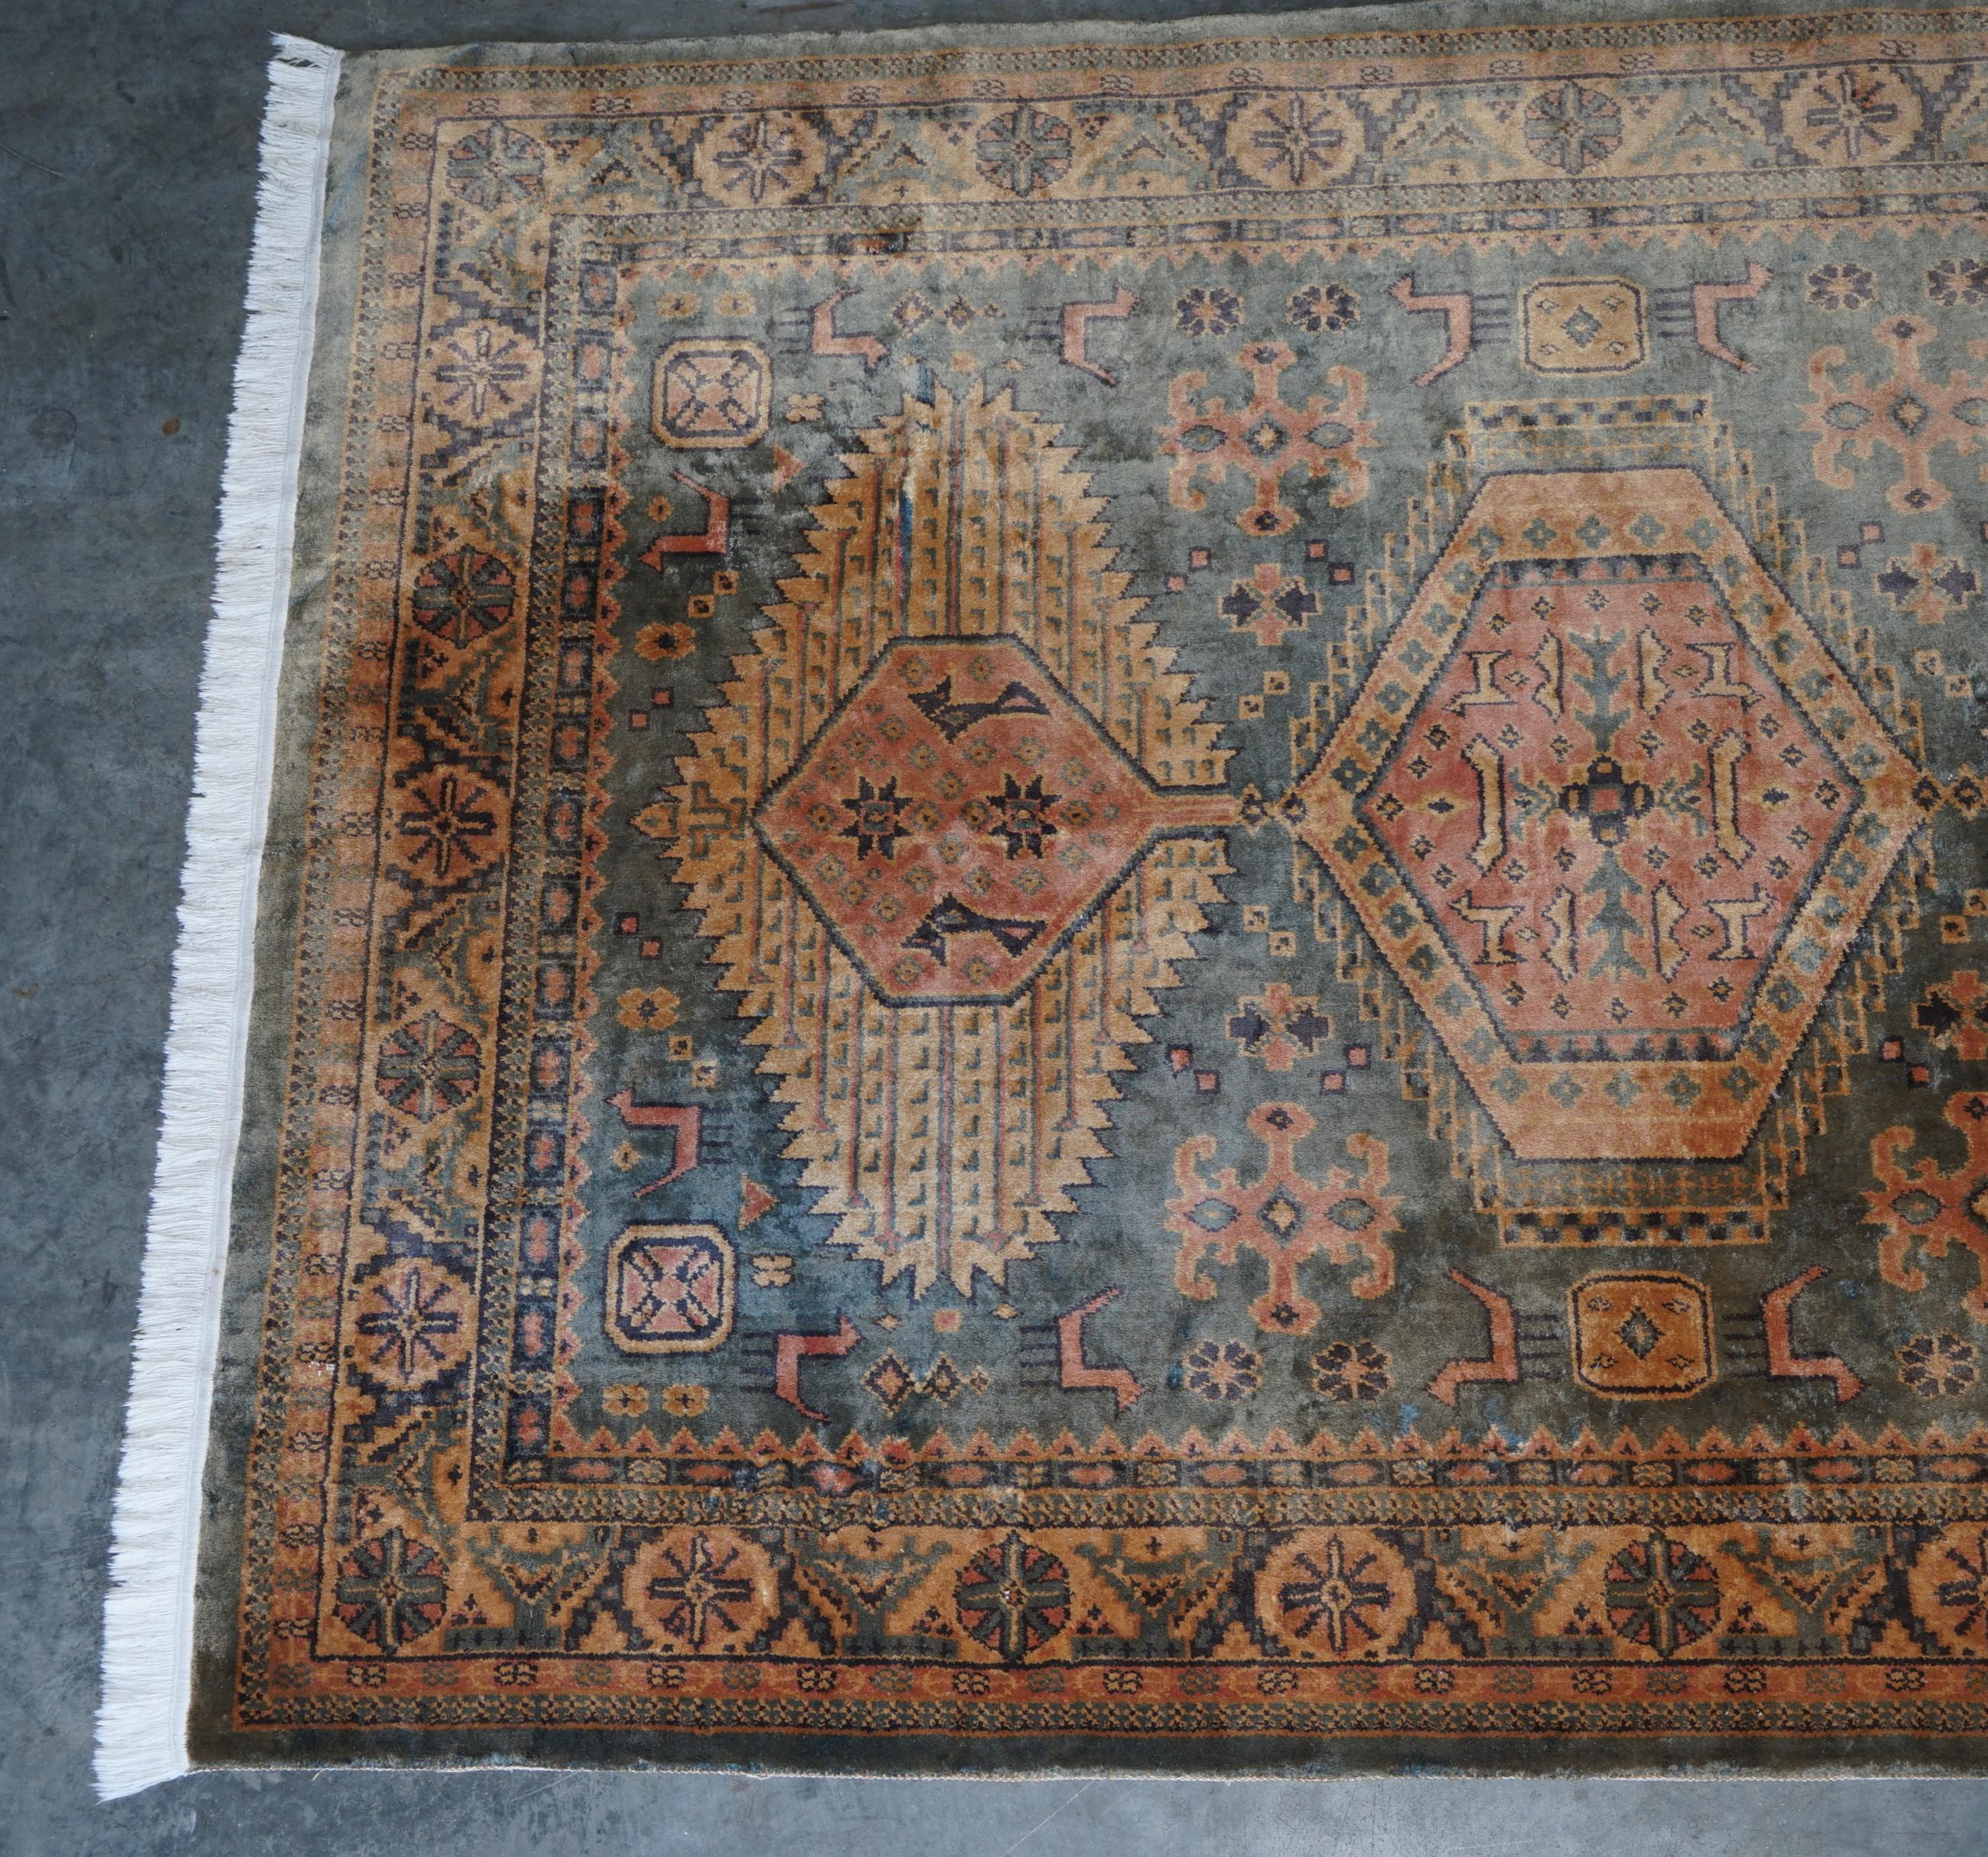 We are delighted to offer for sale this large country house, Antique French rug with lovely Aztek Kilim style design circa 1860-1880

I have a collection of 12 rugs I’m now listing for sale of all kinds of ages, periods, and sizes, some of them